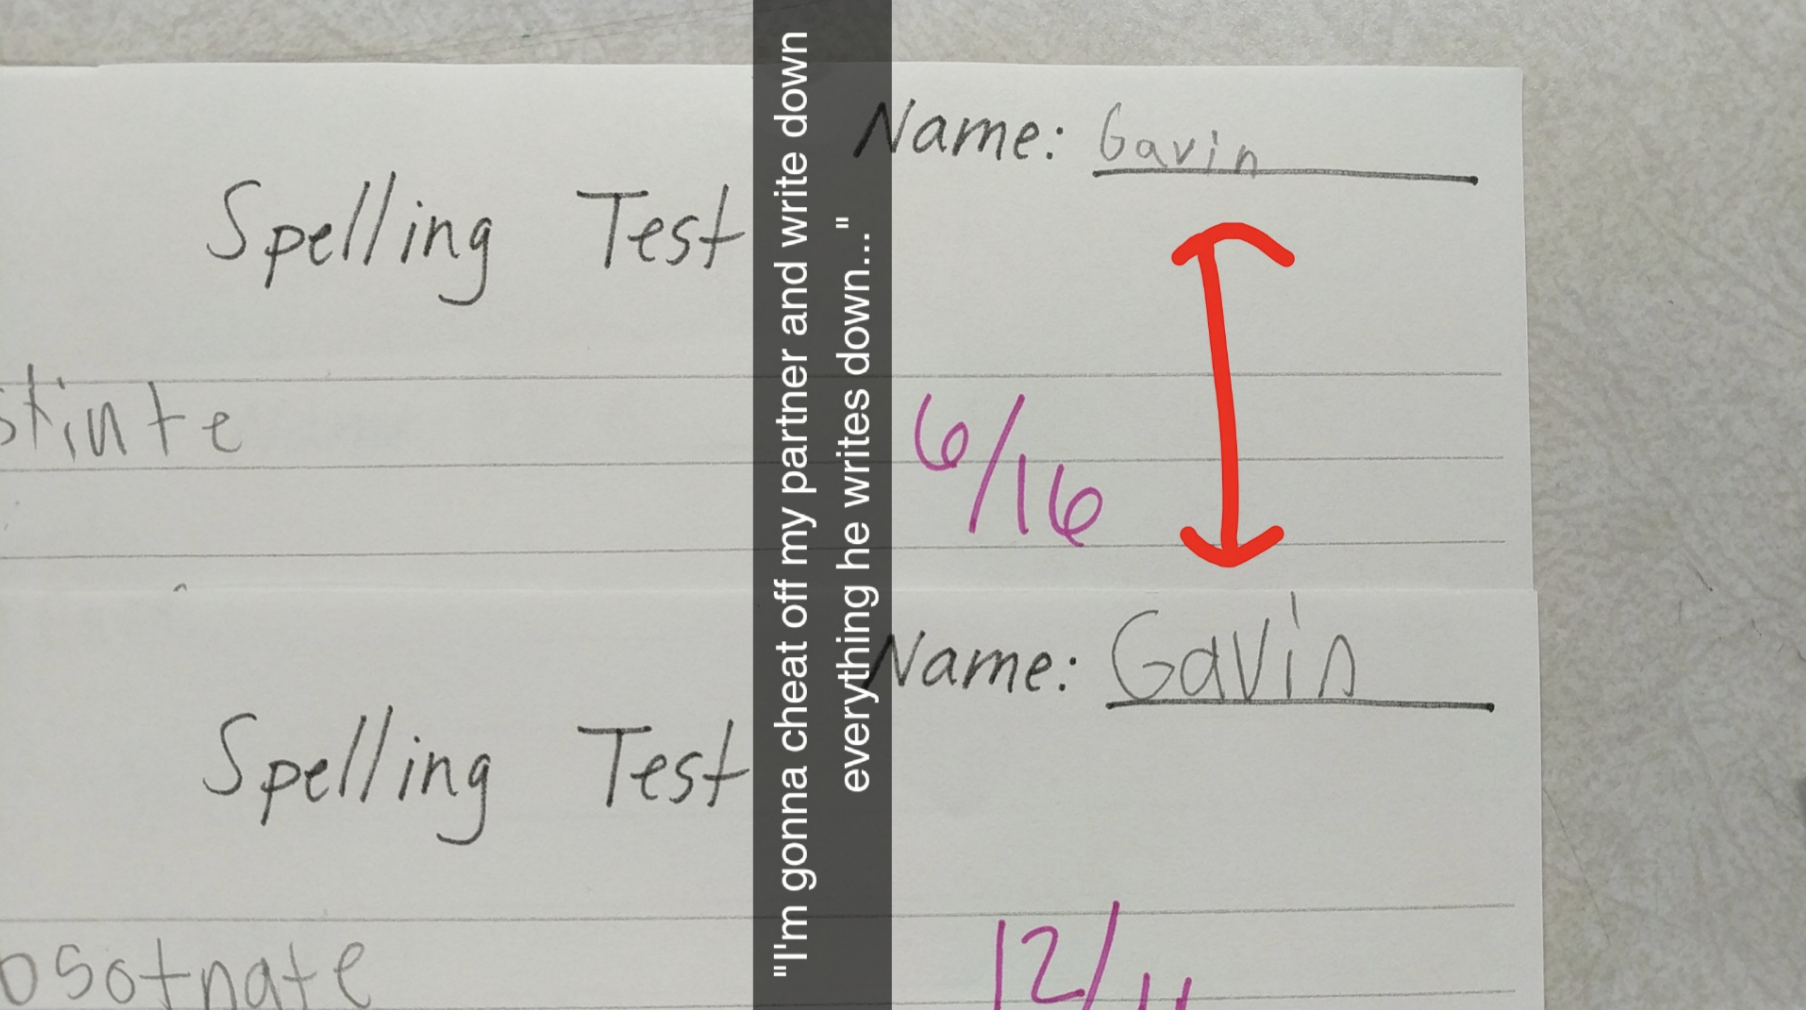 A spelling test with the same names